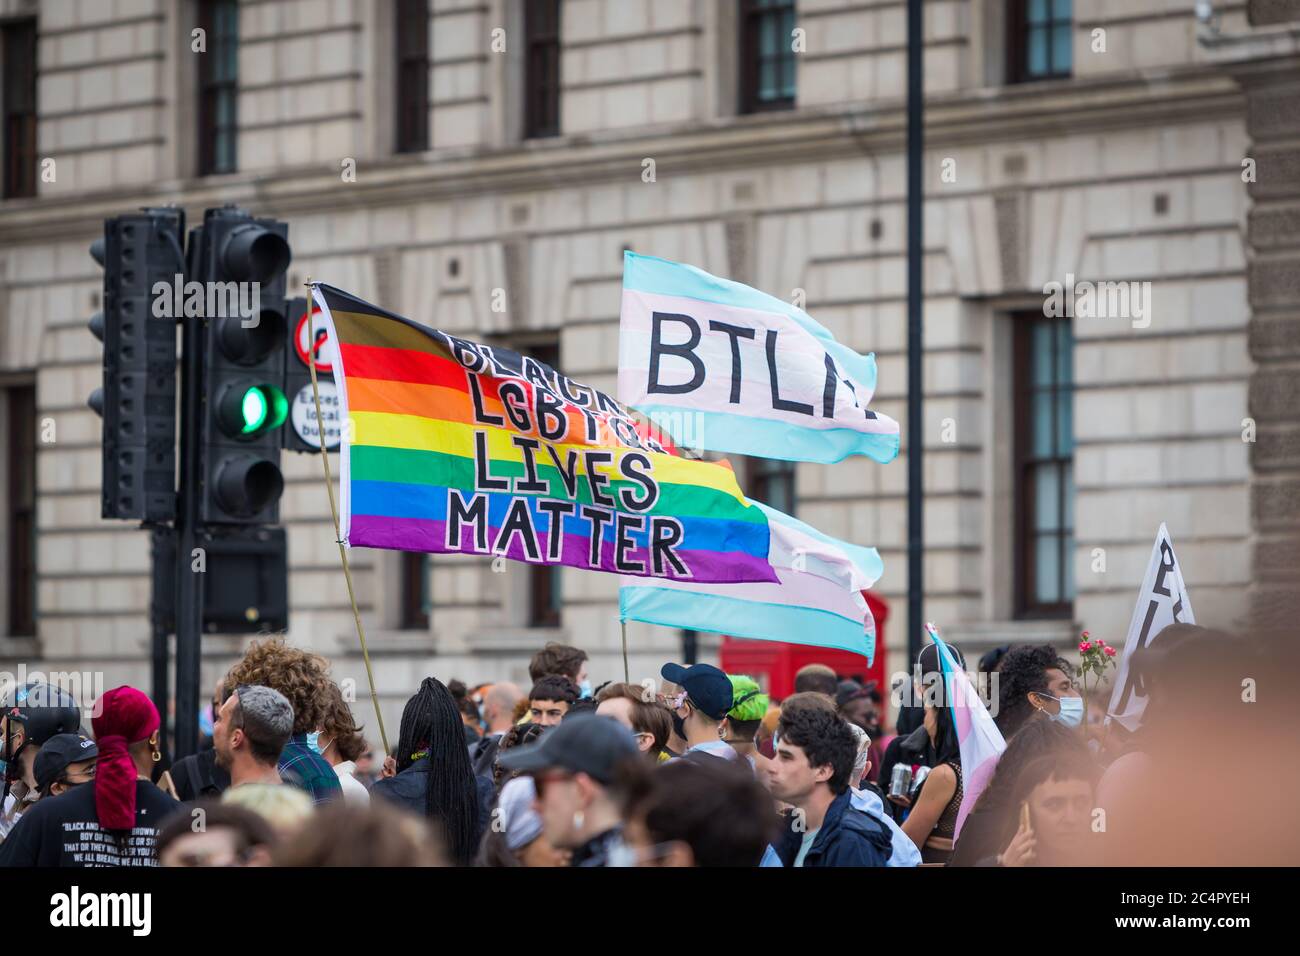 LGBT flags at the Black Trans Lives Matter protest in London Stock Photo